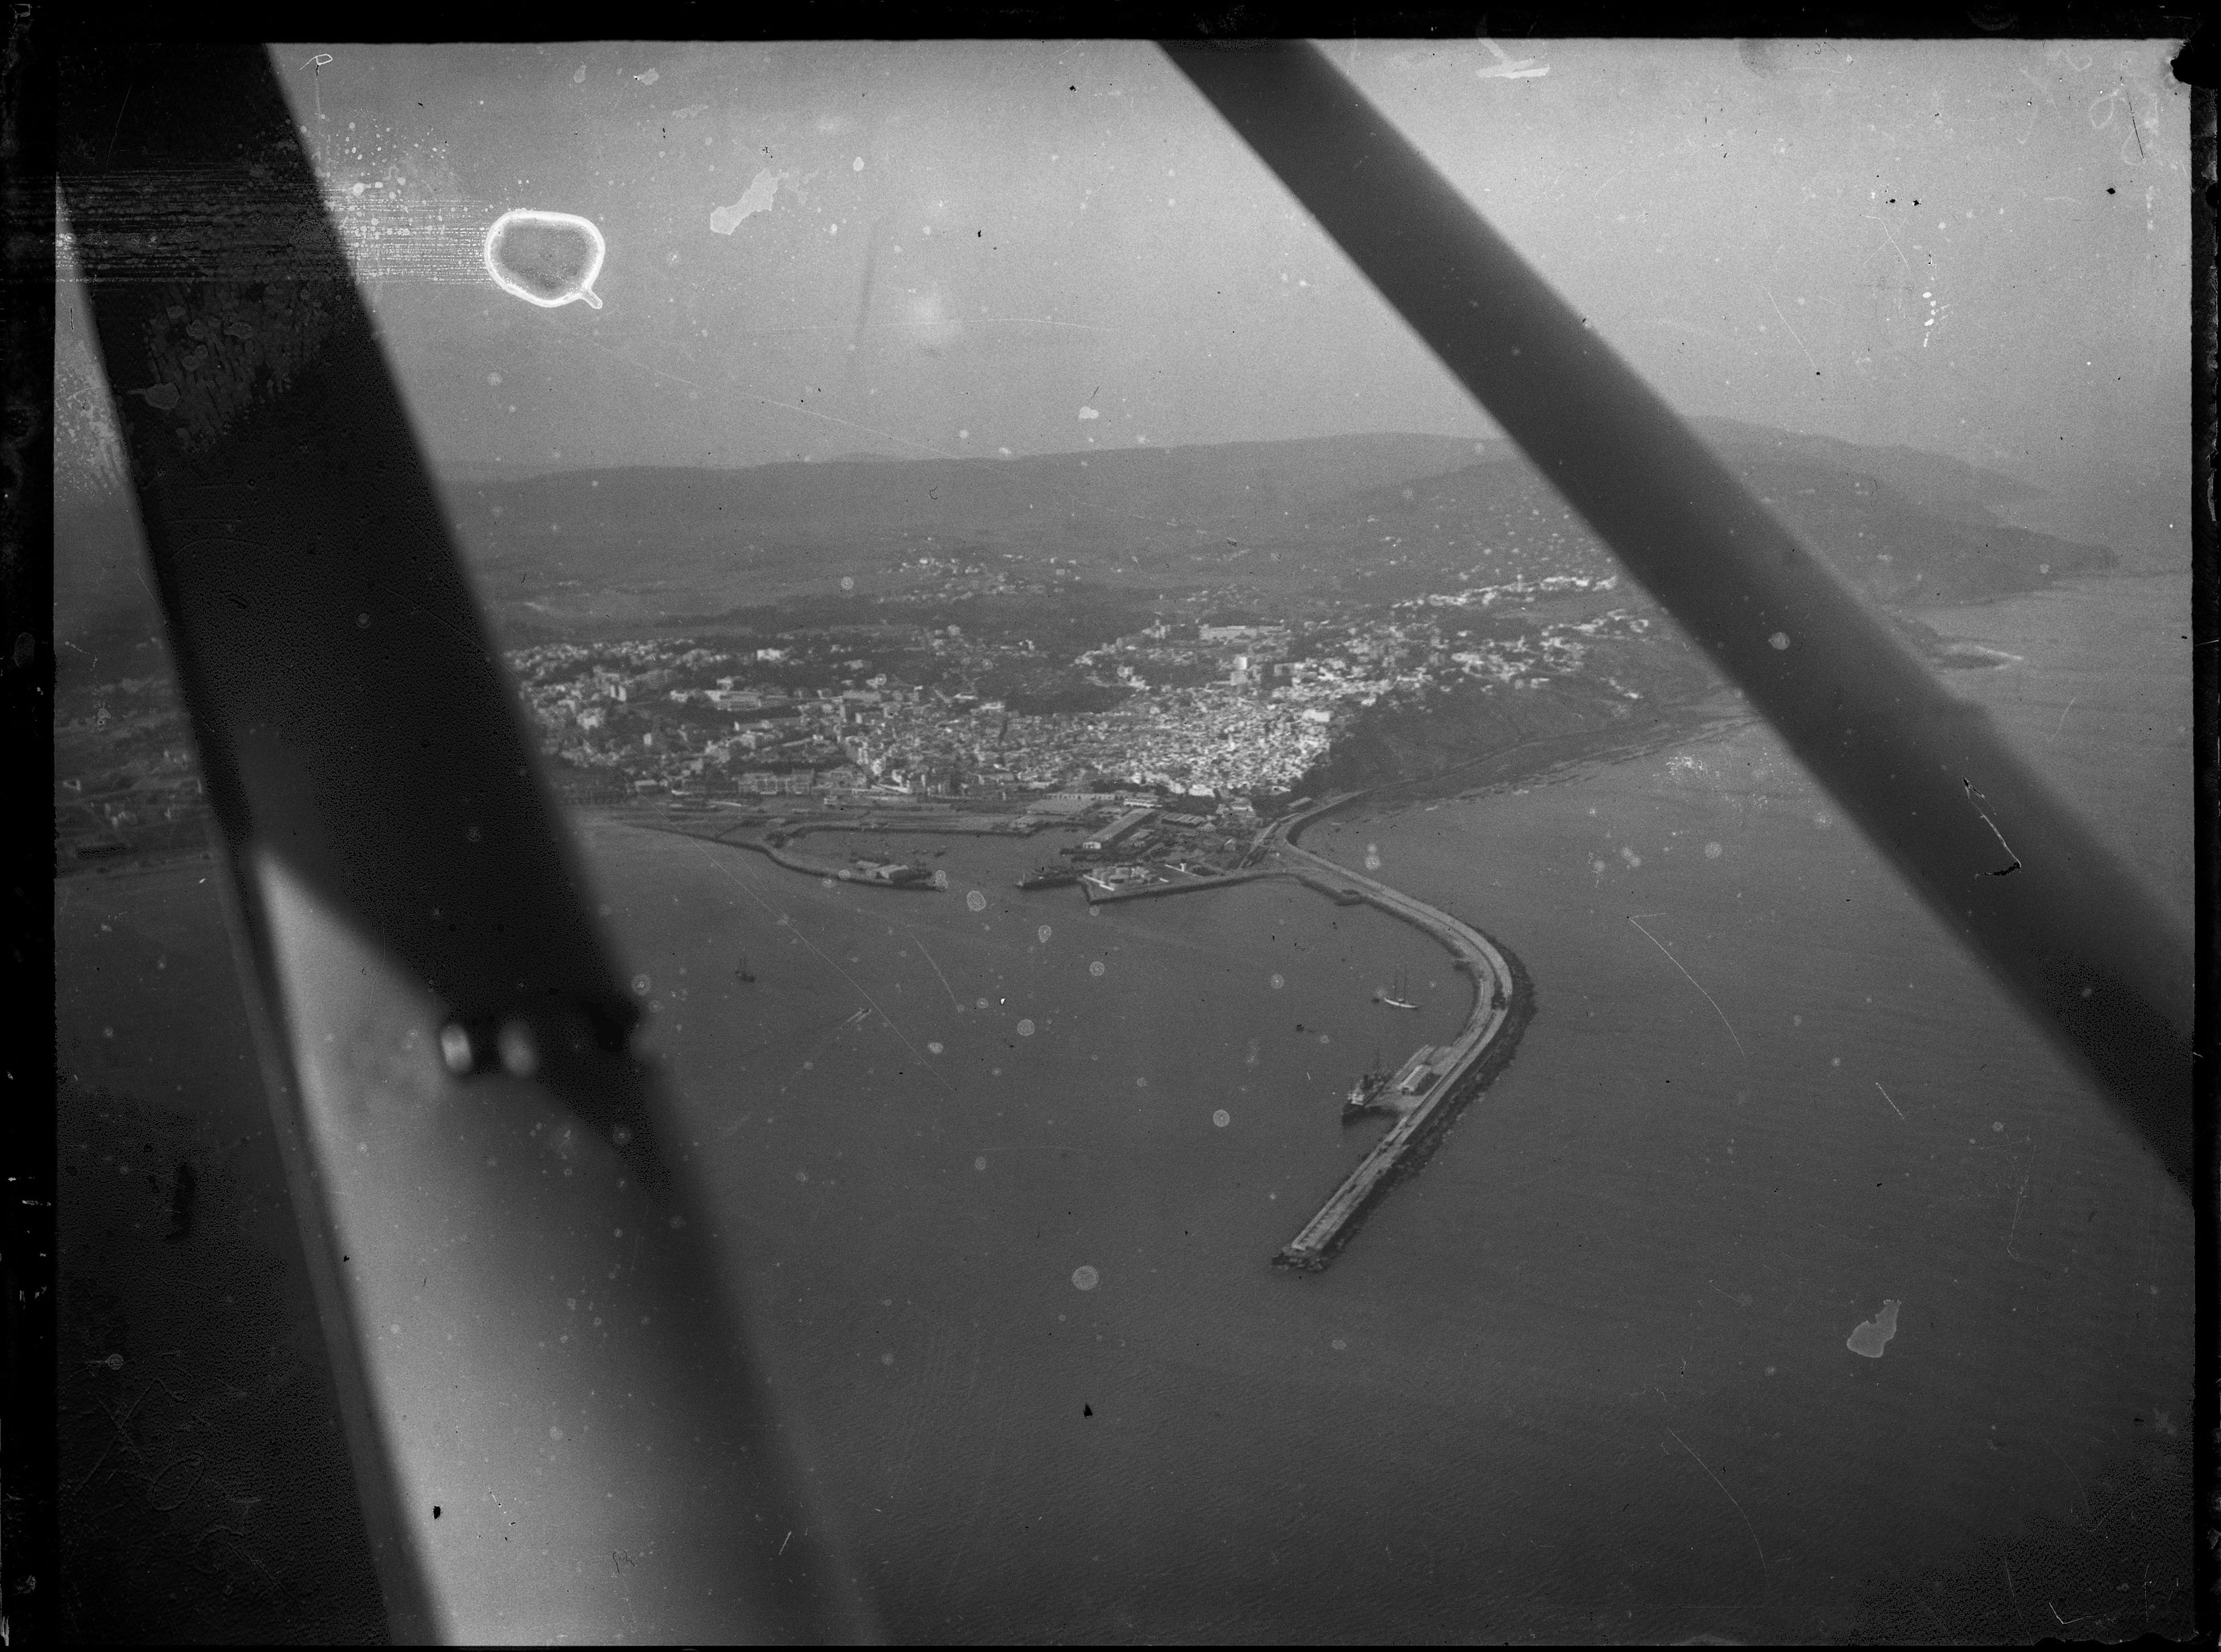 Aeroport Ibn Battouta de Tanger - <p>A view of the Tangier port from the wing of a plane.</p>